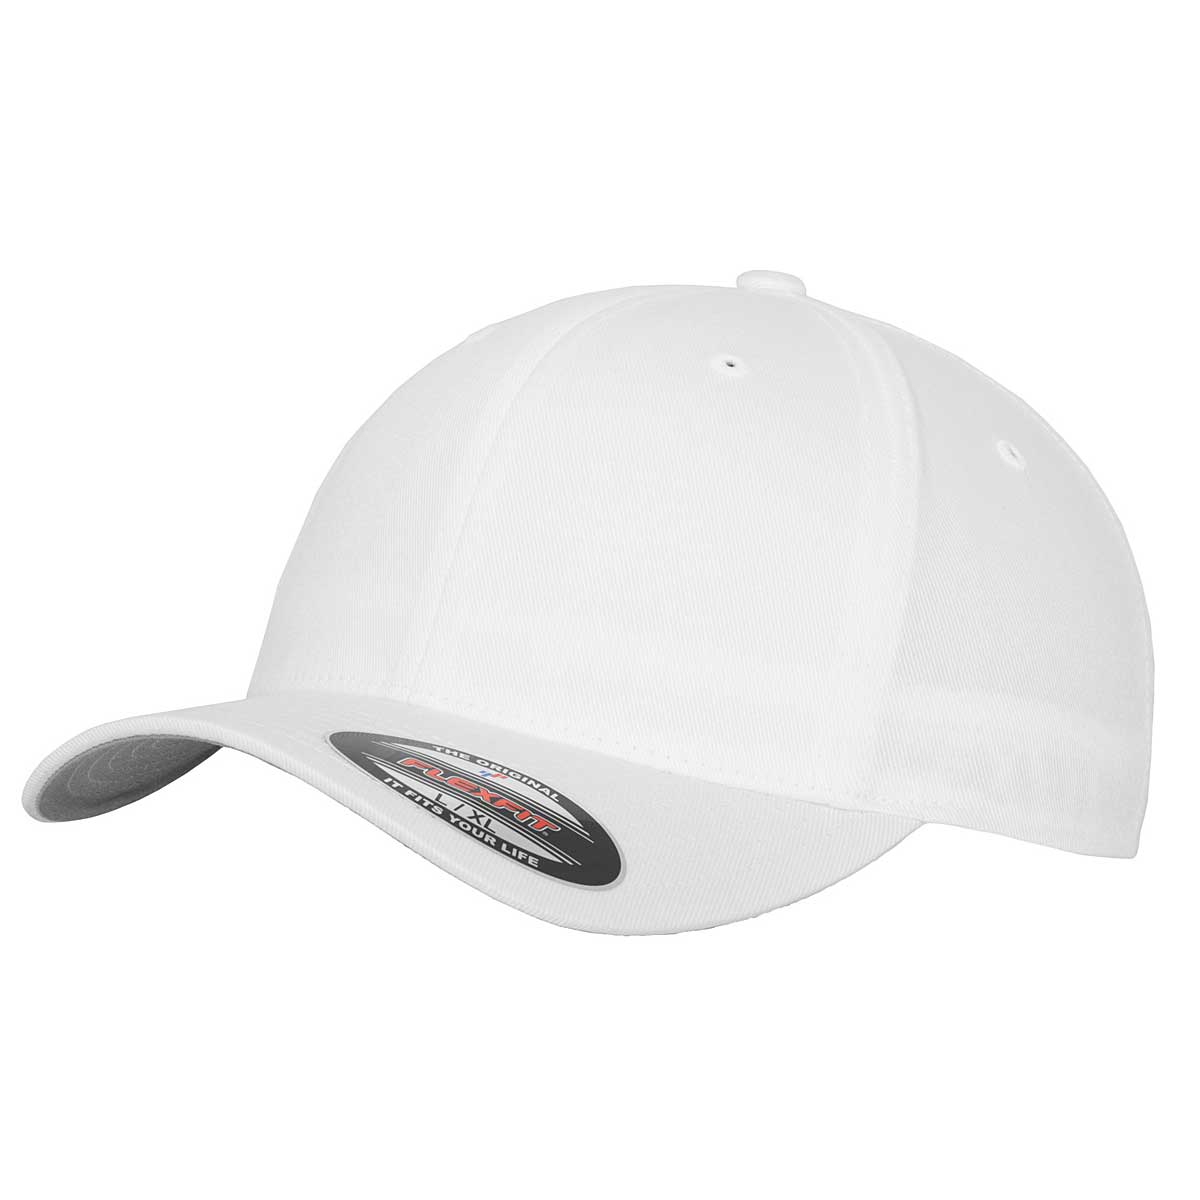 GBP 12.90 on Cheap Ilunionhotels Jordan Outlet! - Buy WOOLY COMBED CAP -  logo-embroidered jersey cap Grigio | Flex Caps